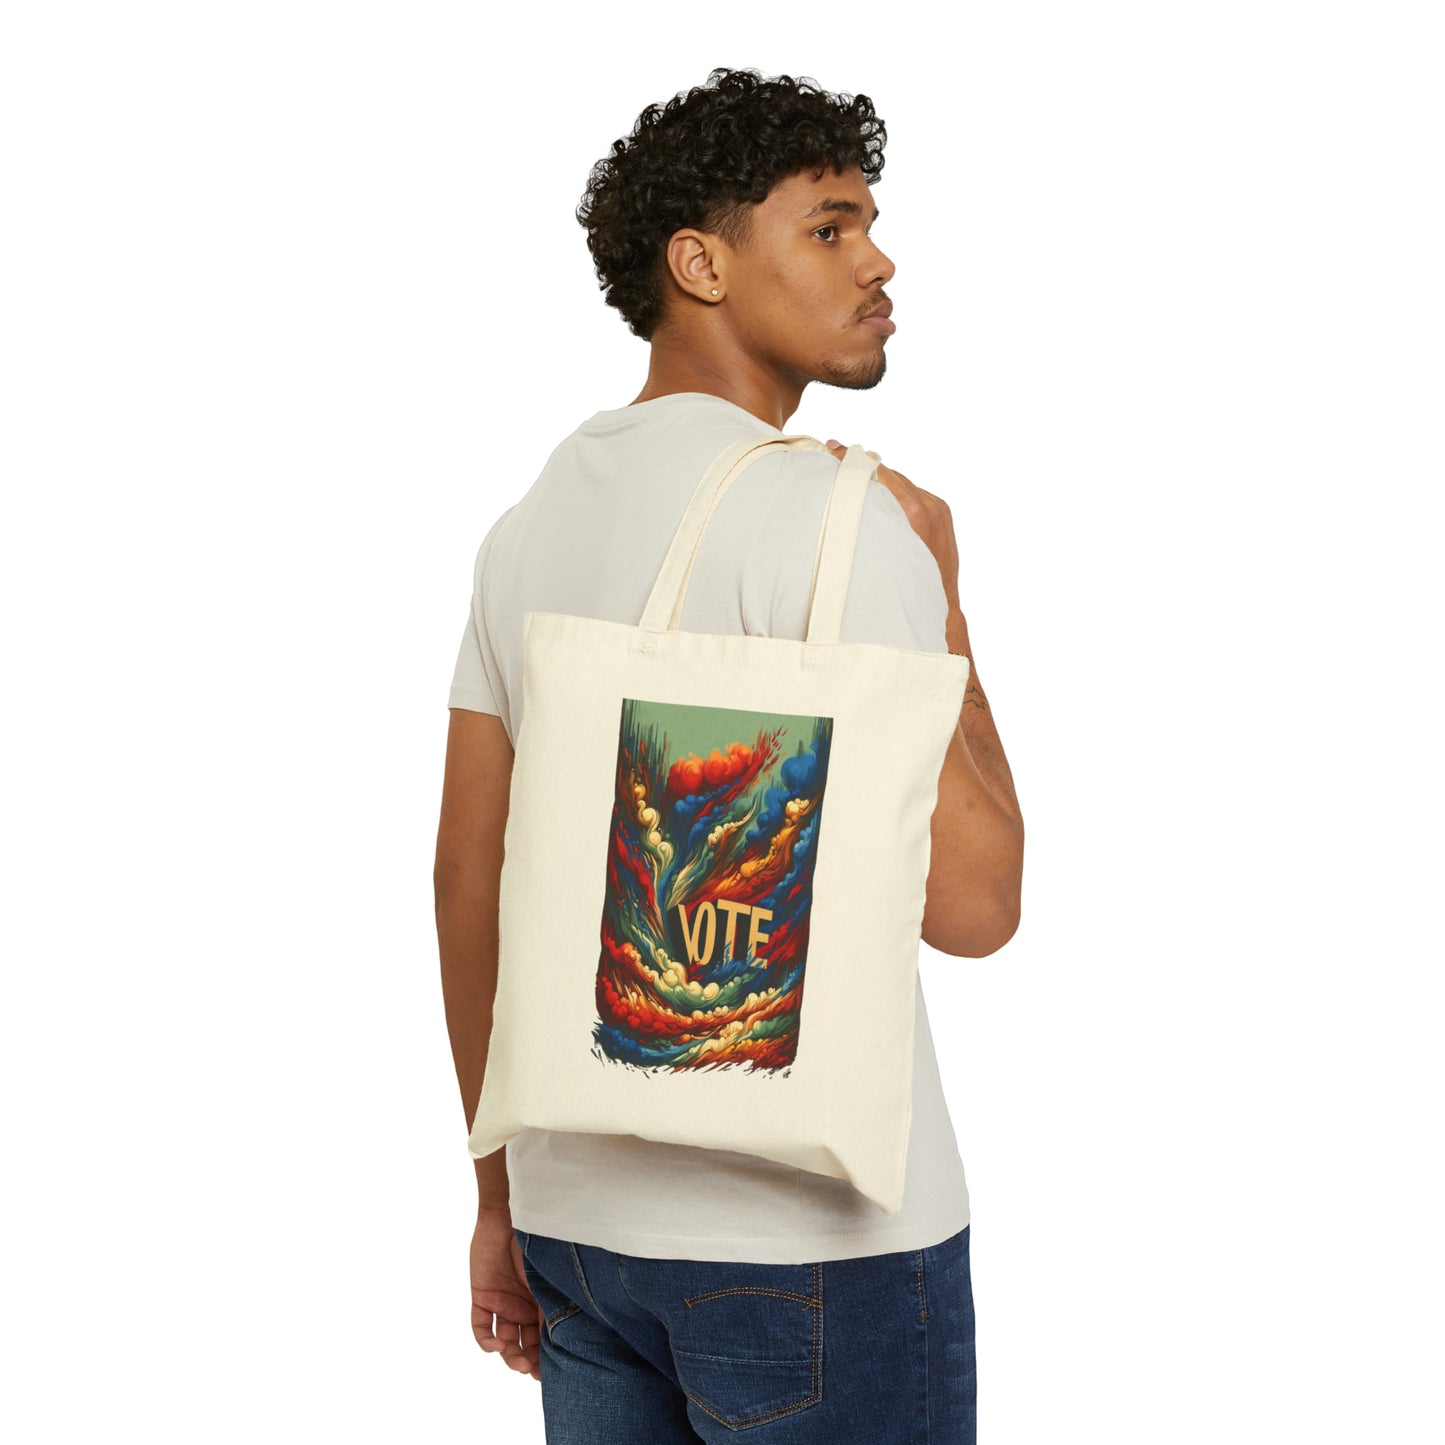 Inspire with a Bold Statement Cotton Canvas Tote Bag: Vote!  carry a laptop, kindle, phone, notebook, goodies to work/coffee shop